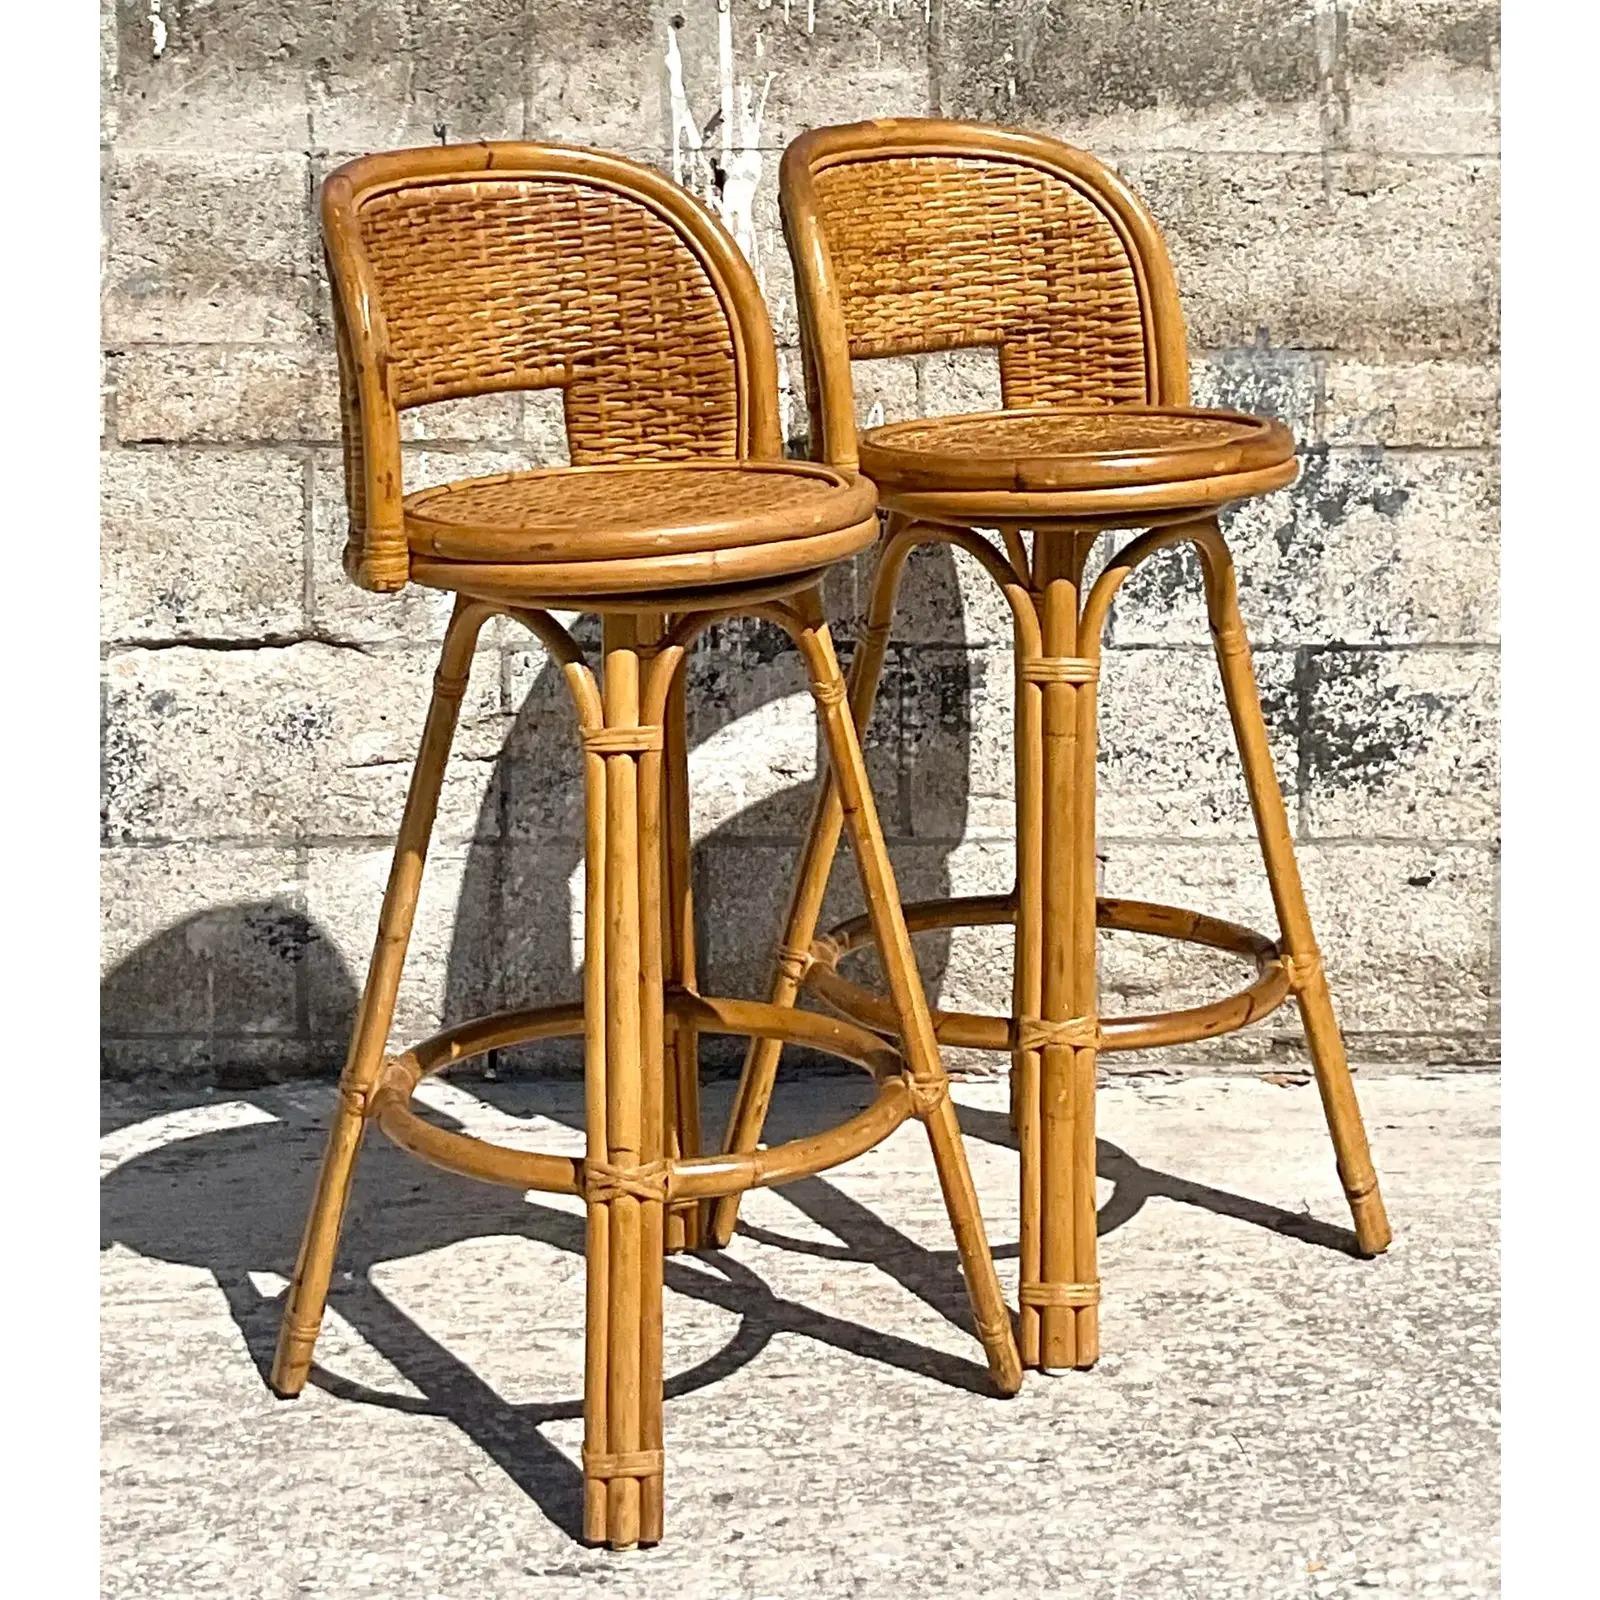 A fabulous pair of vintage Coastal bar stools. Beautiful classic rattan frame in a classic design. Acquired from a Palm Beach estate.